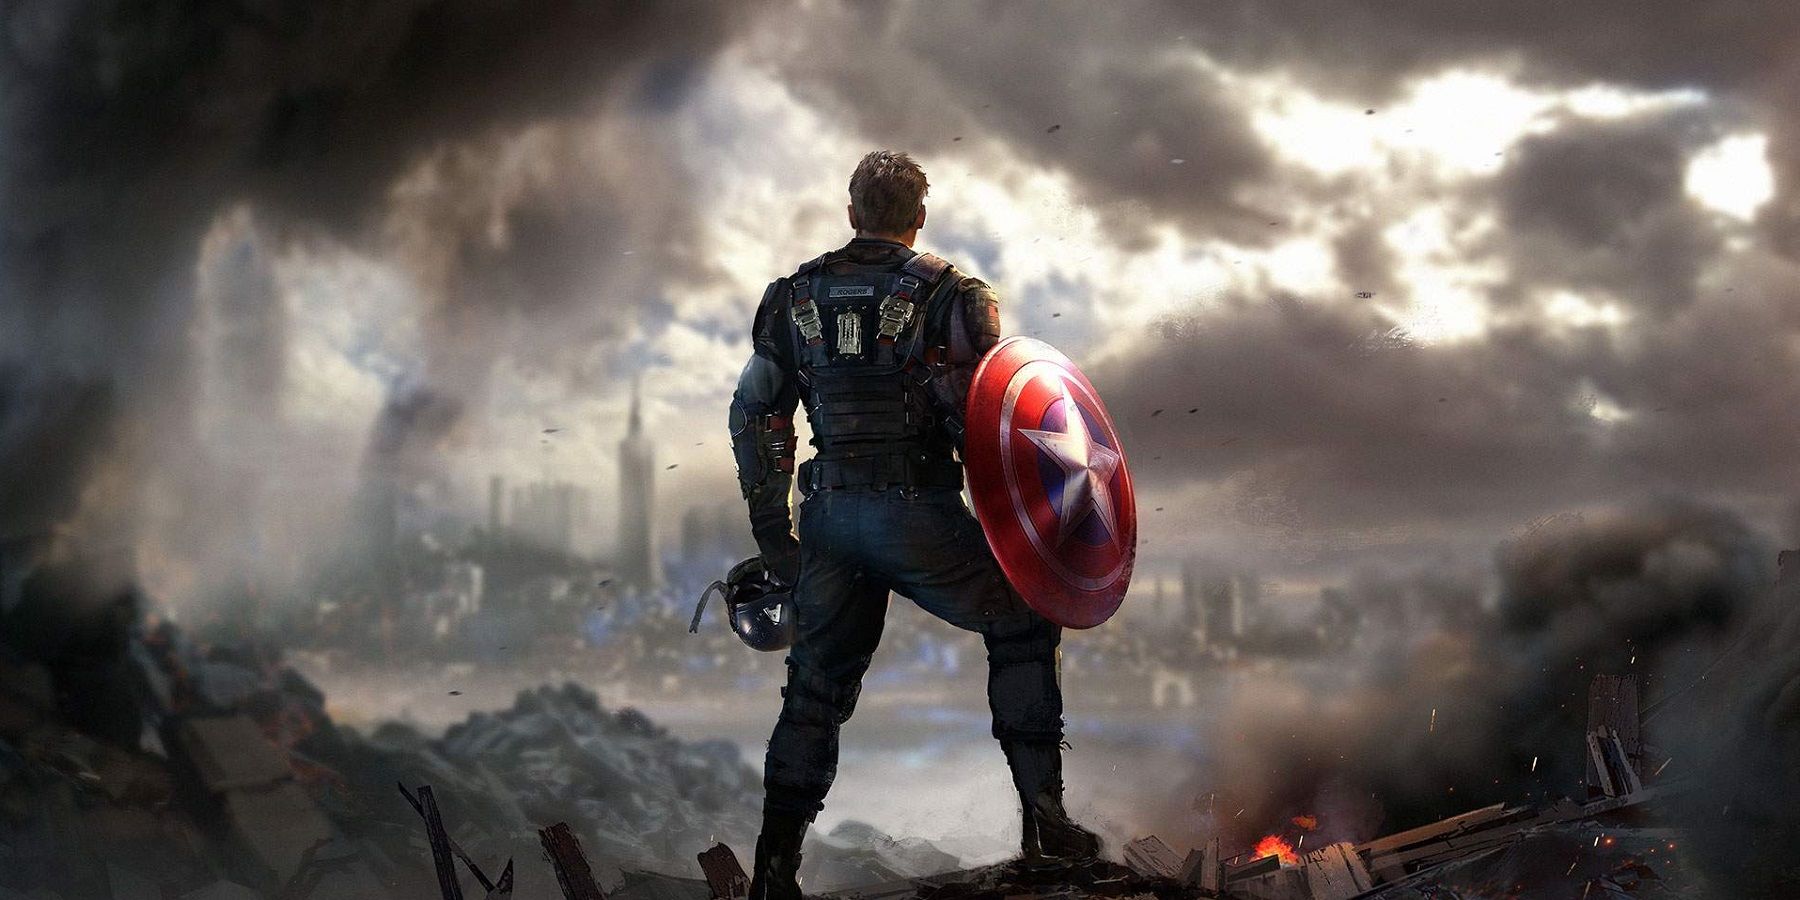 A new leak showcases Captain America in the bright, colorful suit.